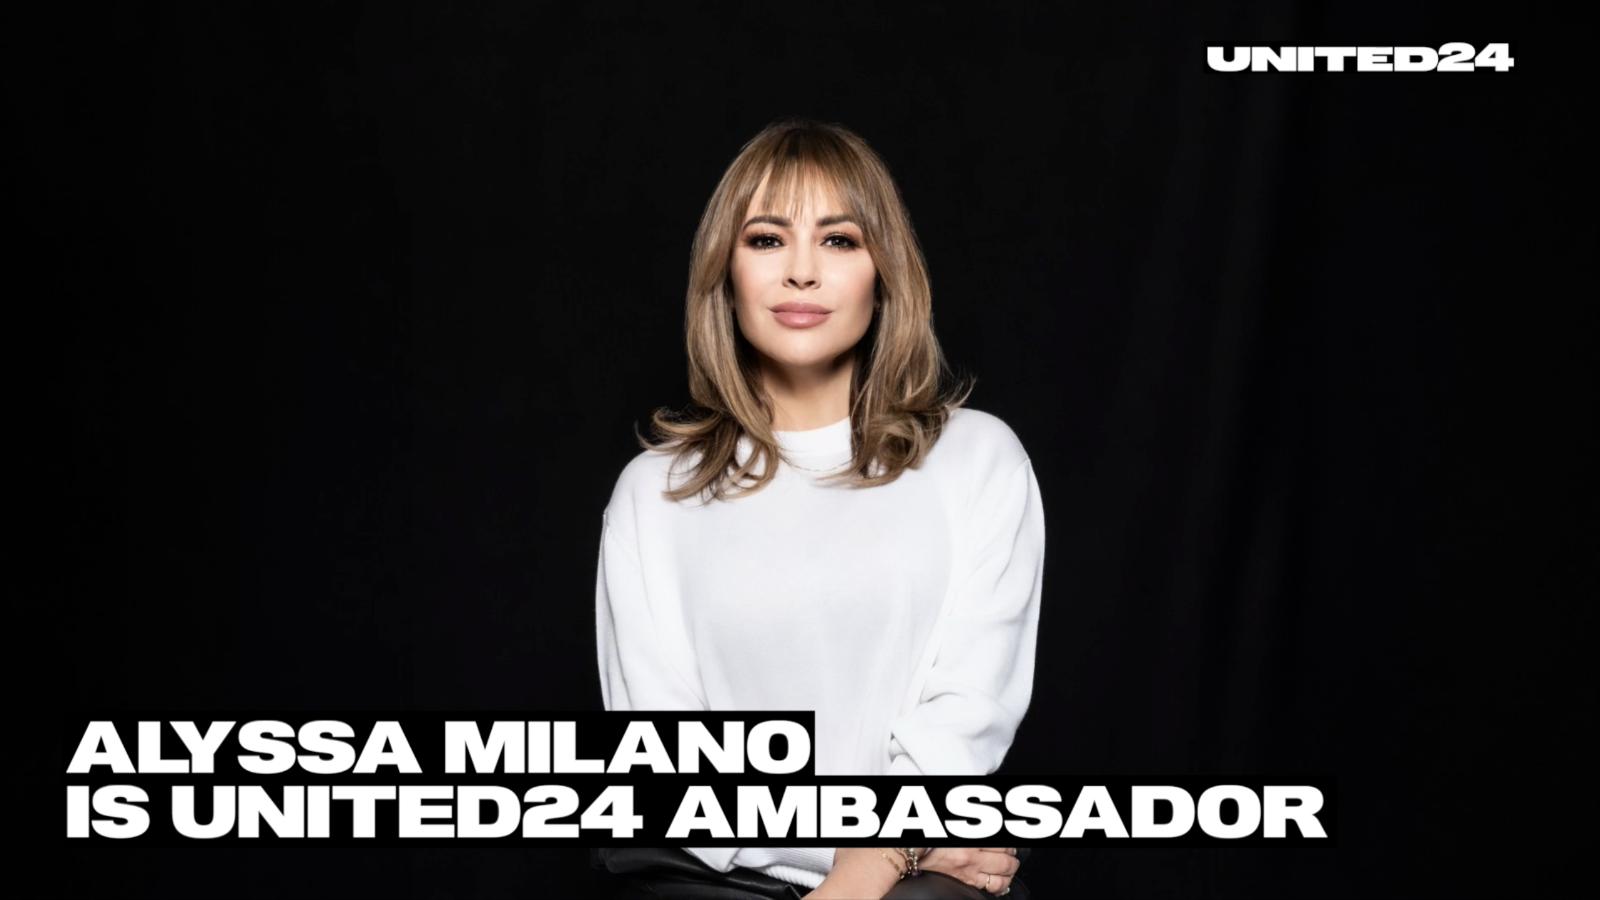 Alyssa Milano, star of the Charmed TV series, is now also a UNITED24 ambassador!